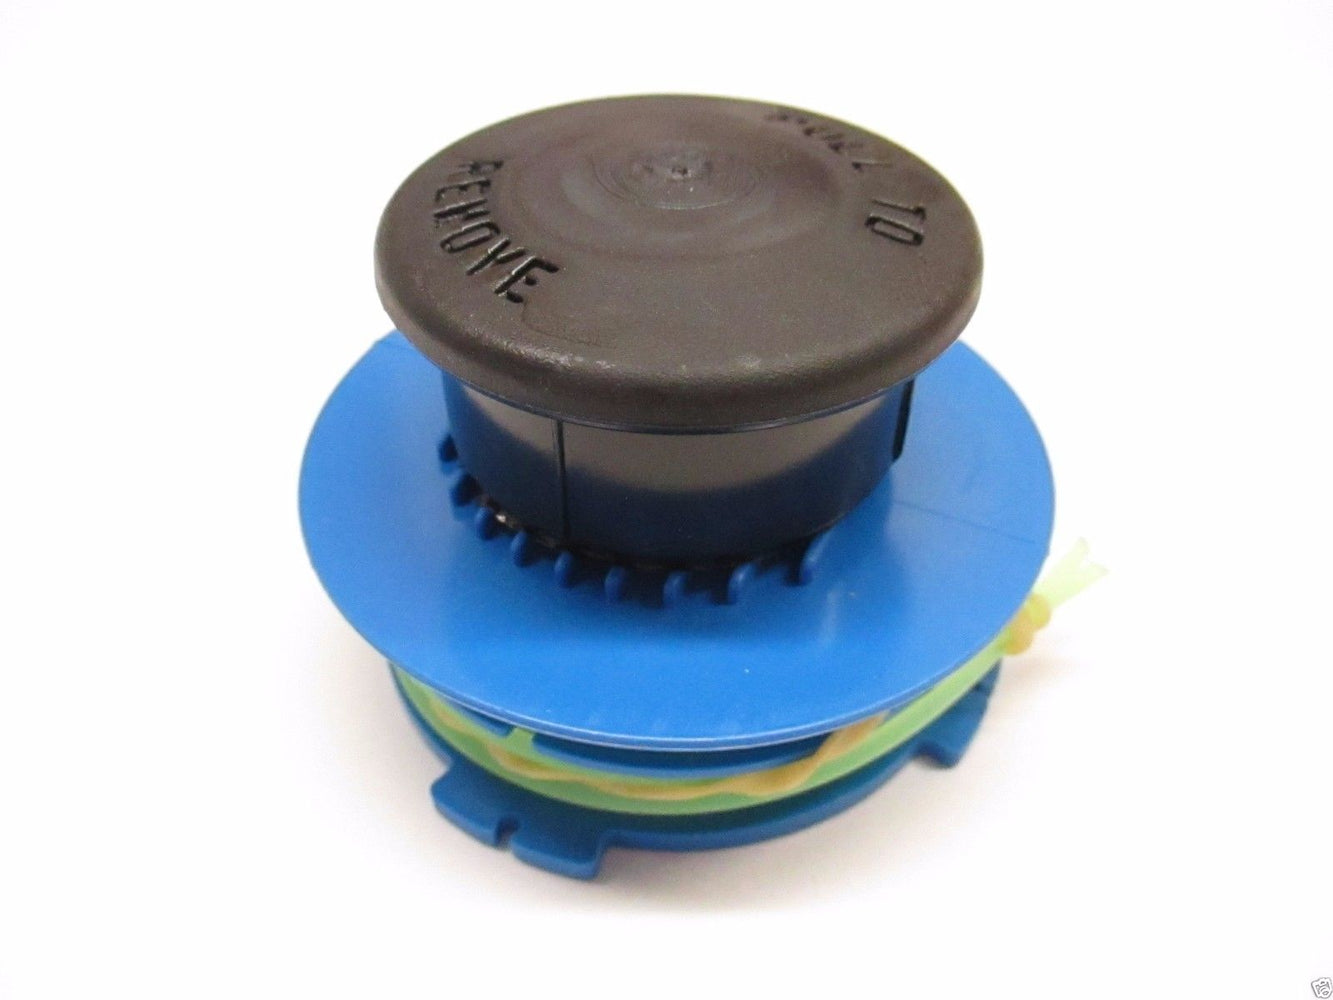 Poulan Weed Eater 952711551 Trimmer Spool Fits BC2400 BC2500LE PL500 XT600 SST25